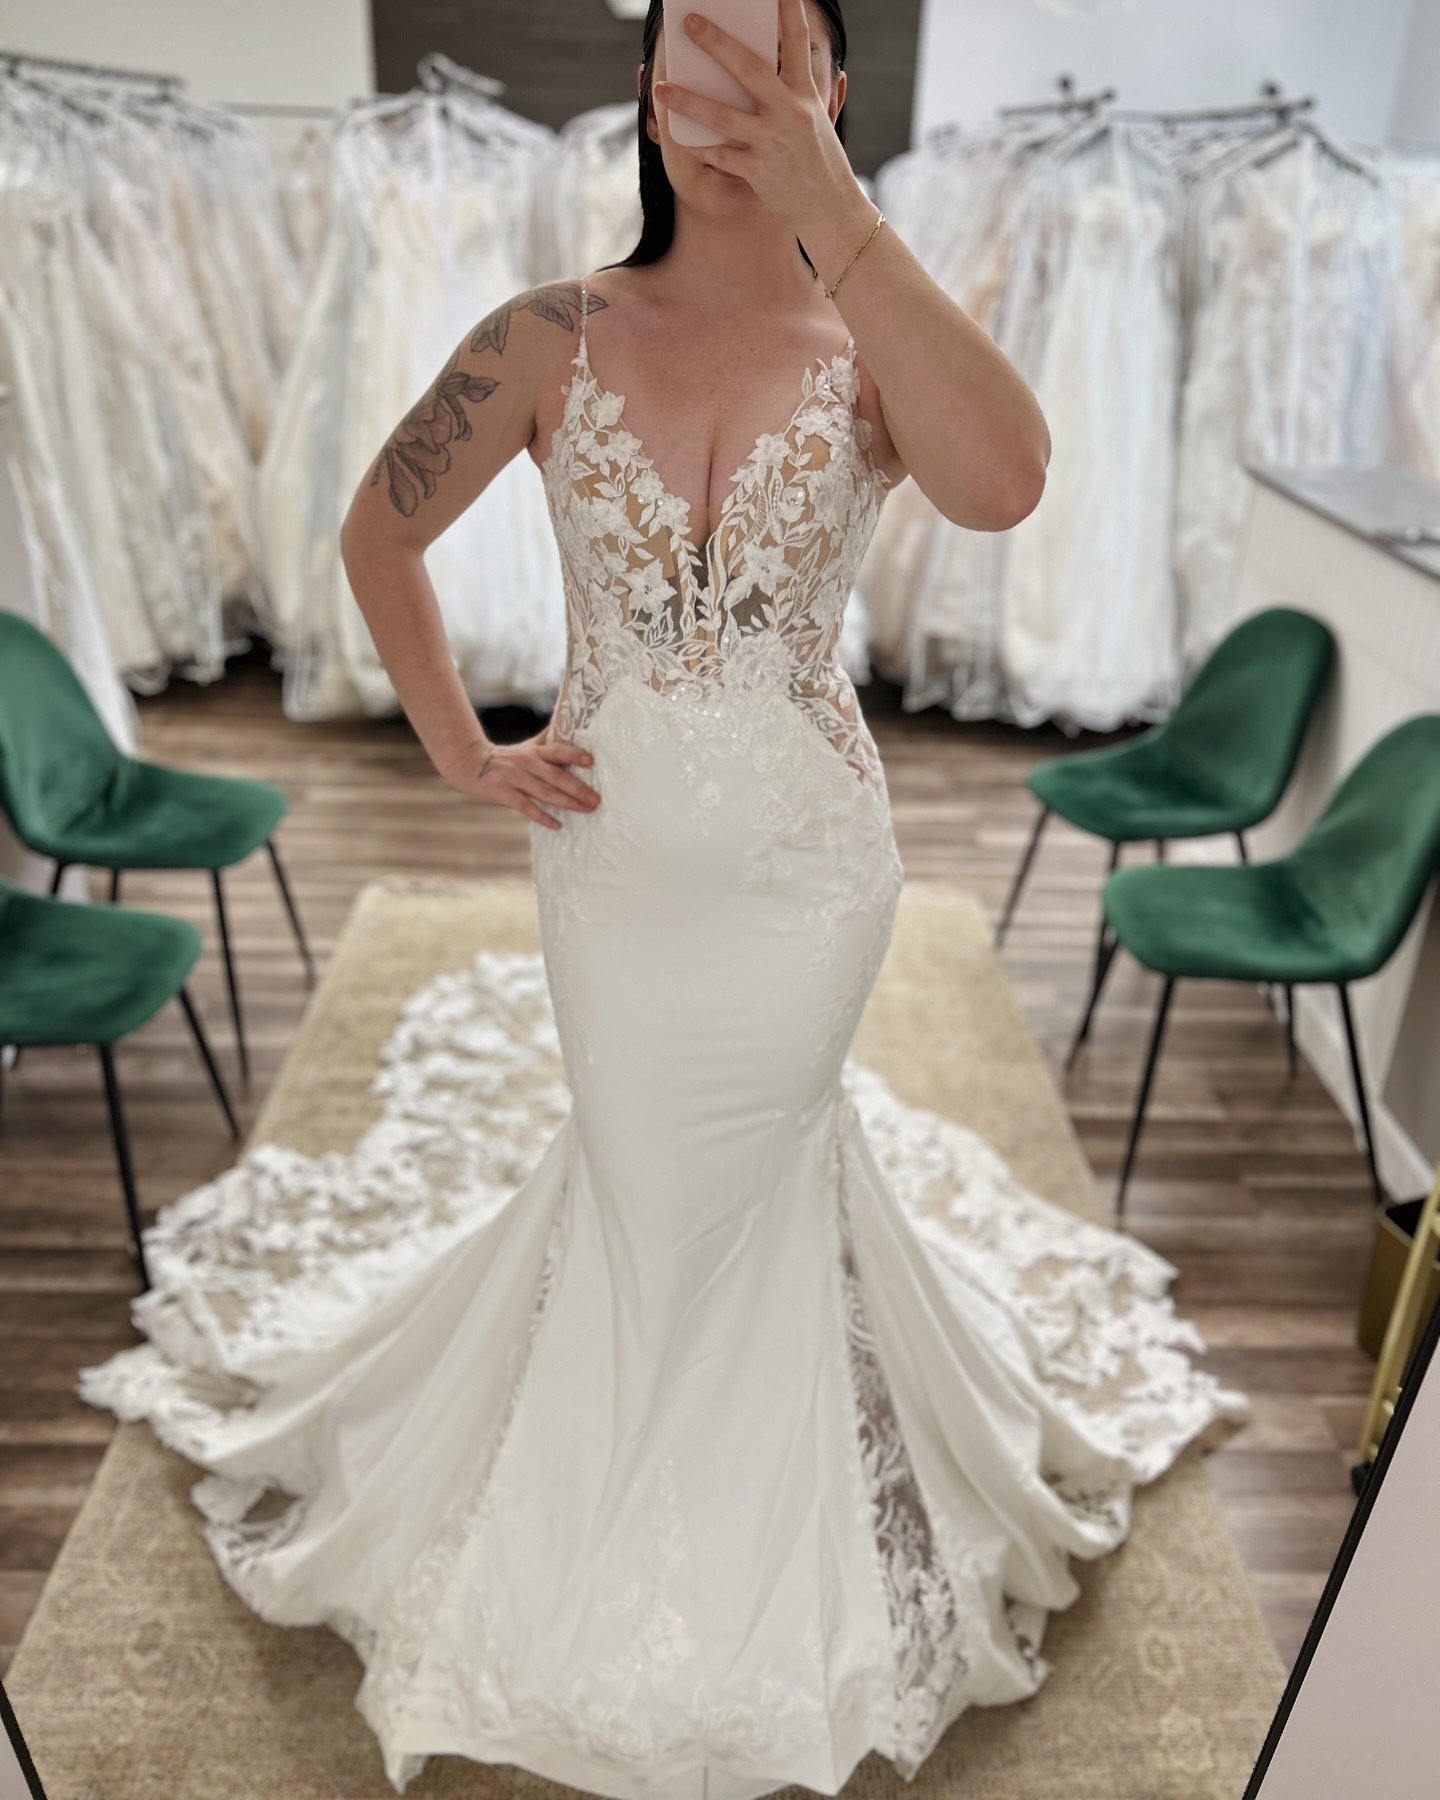 A stunning brand new arrival for #ｓｅｌｆｉｅｓｕｎｄａｙ 🤍

Originally: $2,599
Now: $1,599
Size 10